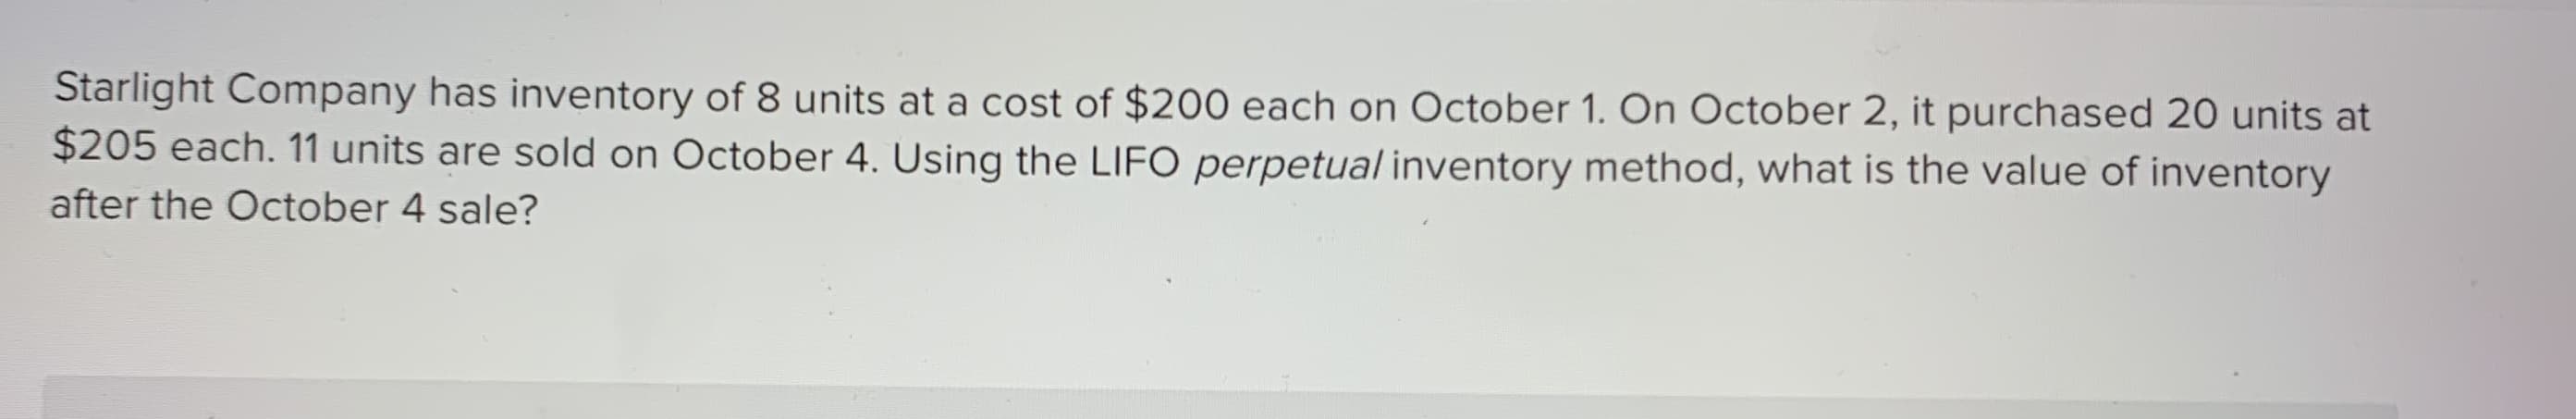 Starlight Company has inventory of 8 units at a cost of $200 each on October 1. On October 2, it purchased 20 units at
$205 each. 11 units are sold on October 4. Using the LIFO perpetual inventory method, what is the value of inventory
after the October 4 sale?
